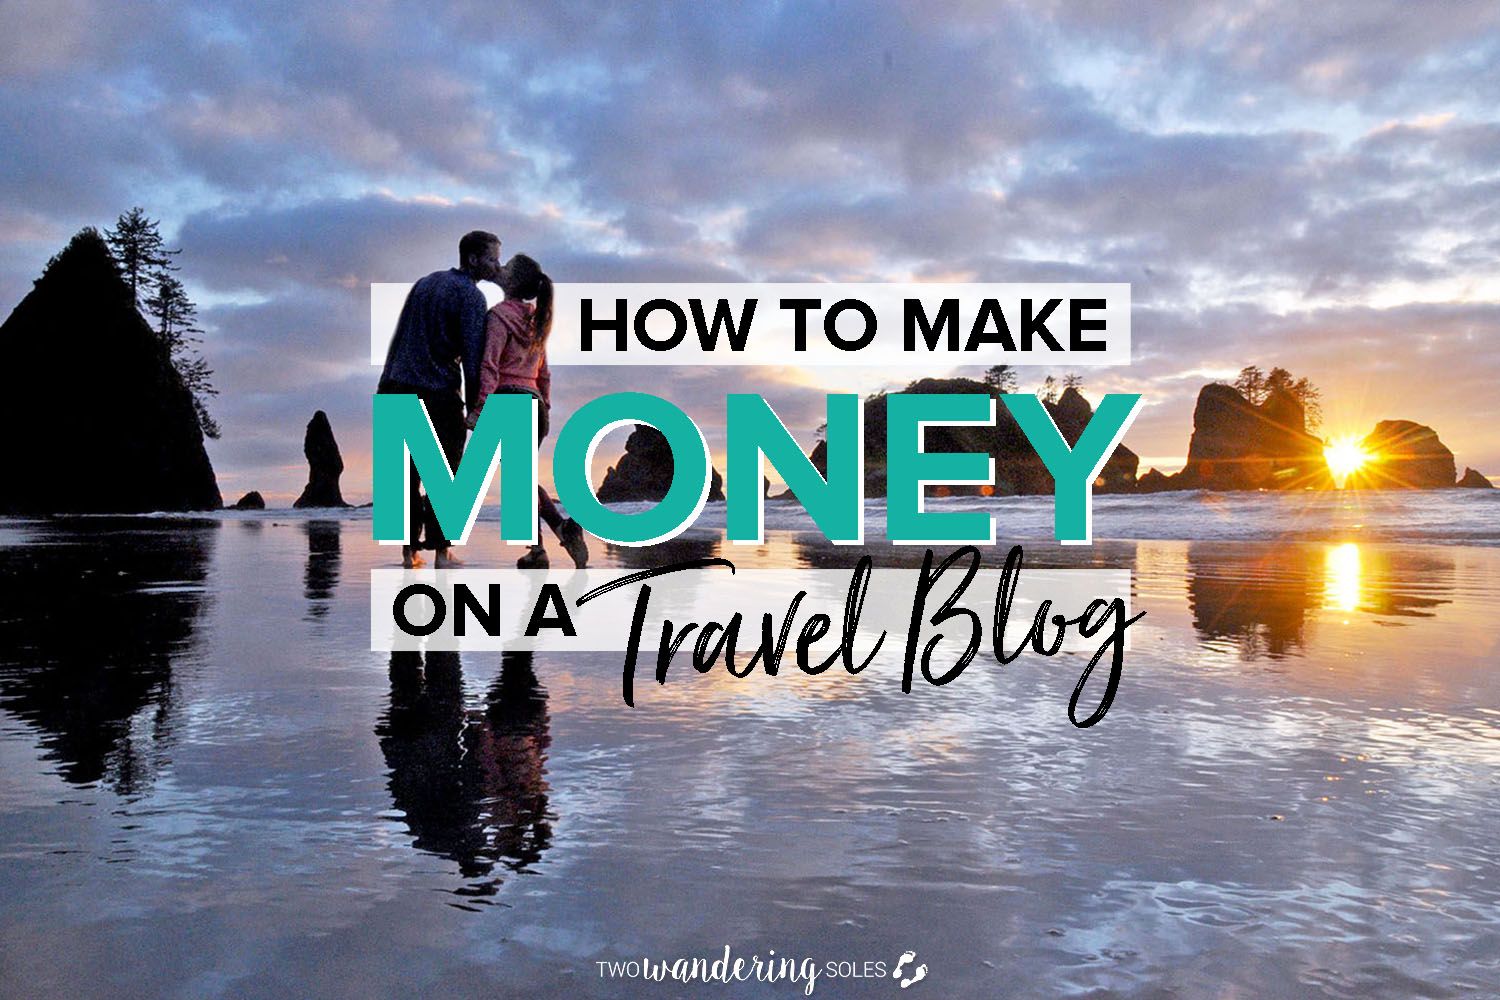 How to Make Money on a Travel Blog